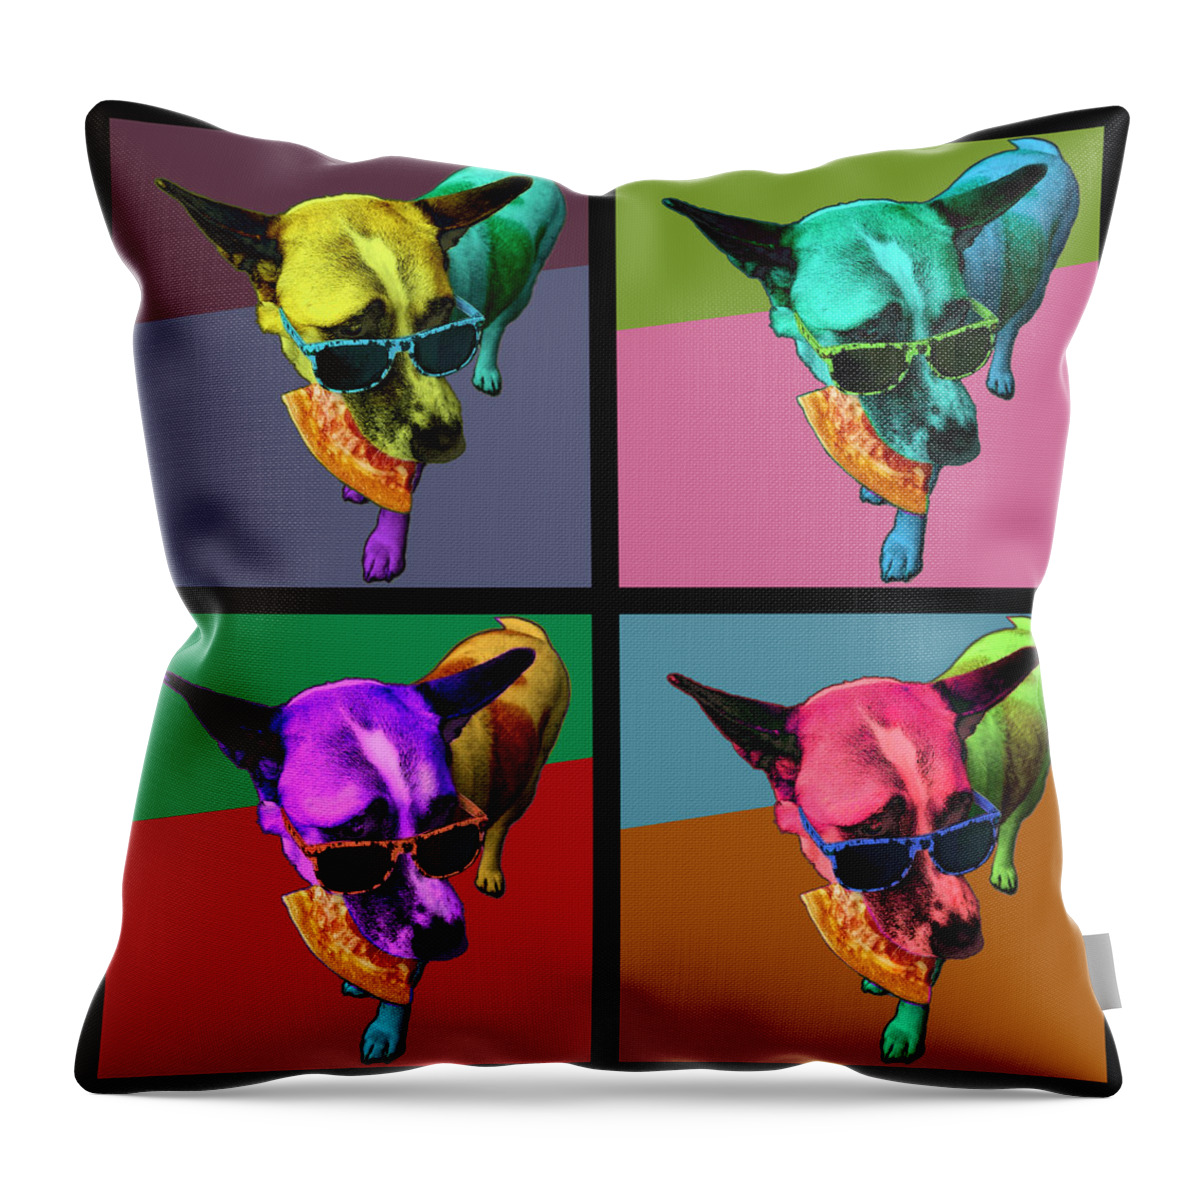 Pizza Throw Pillow featuring the digital art Pizza Dog Quartet by James W Johnson